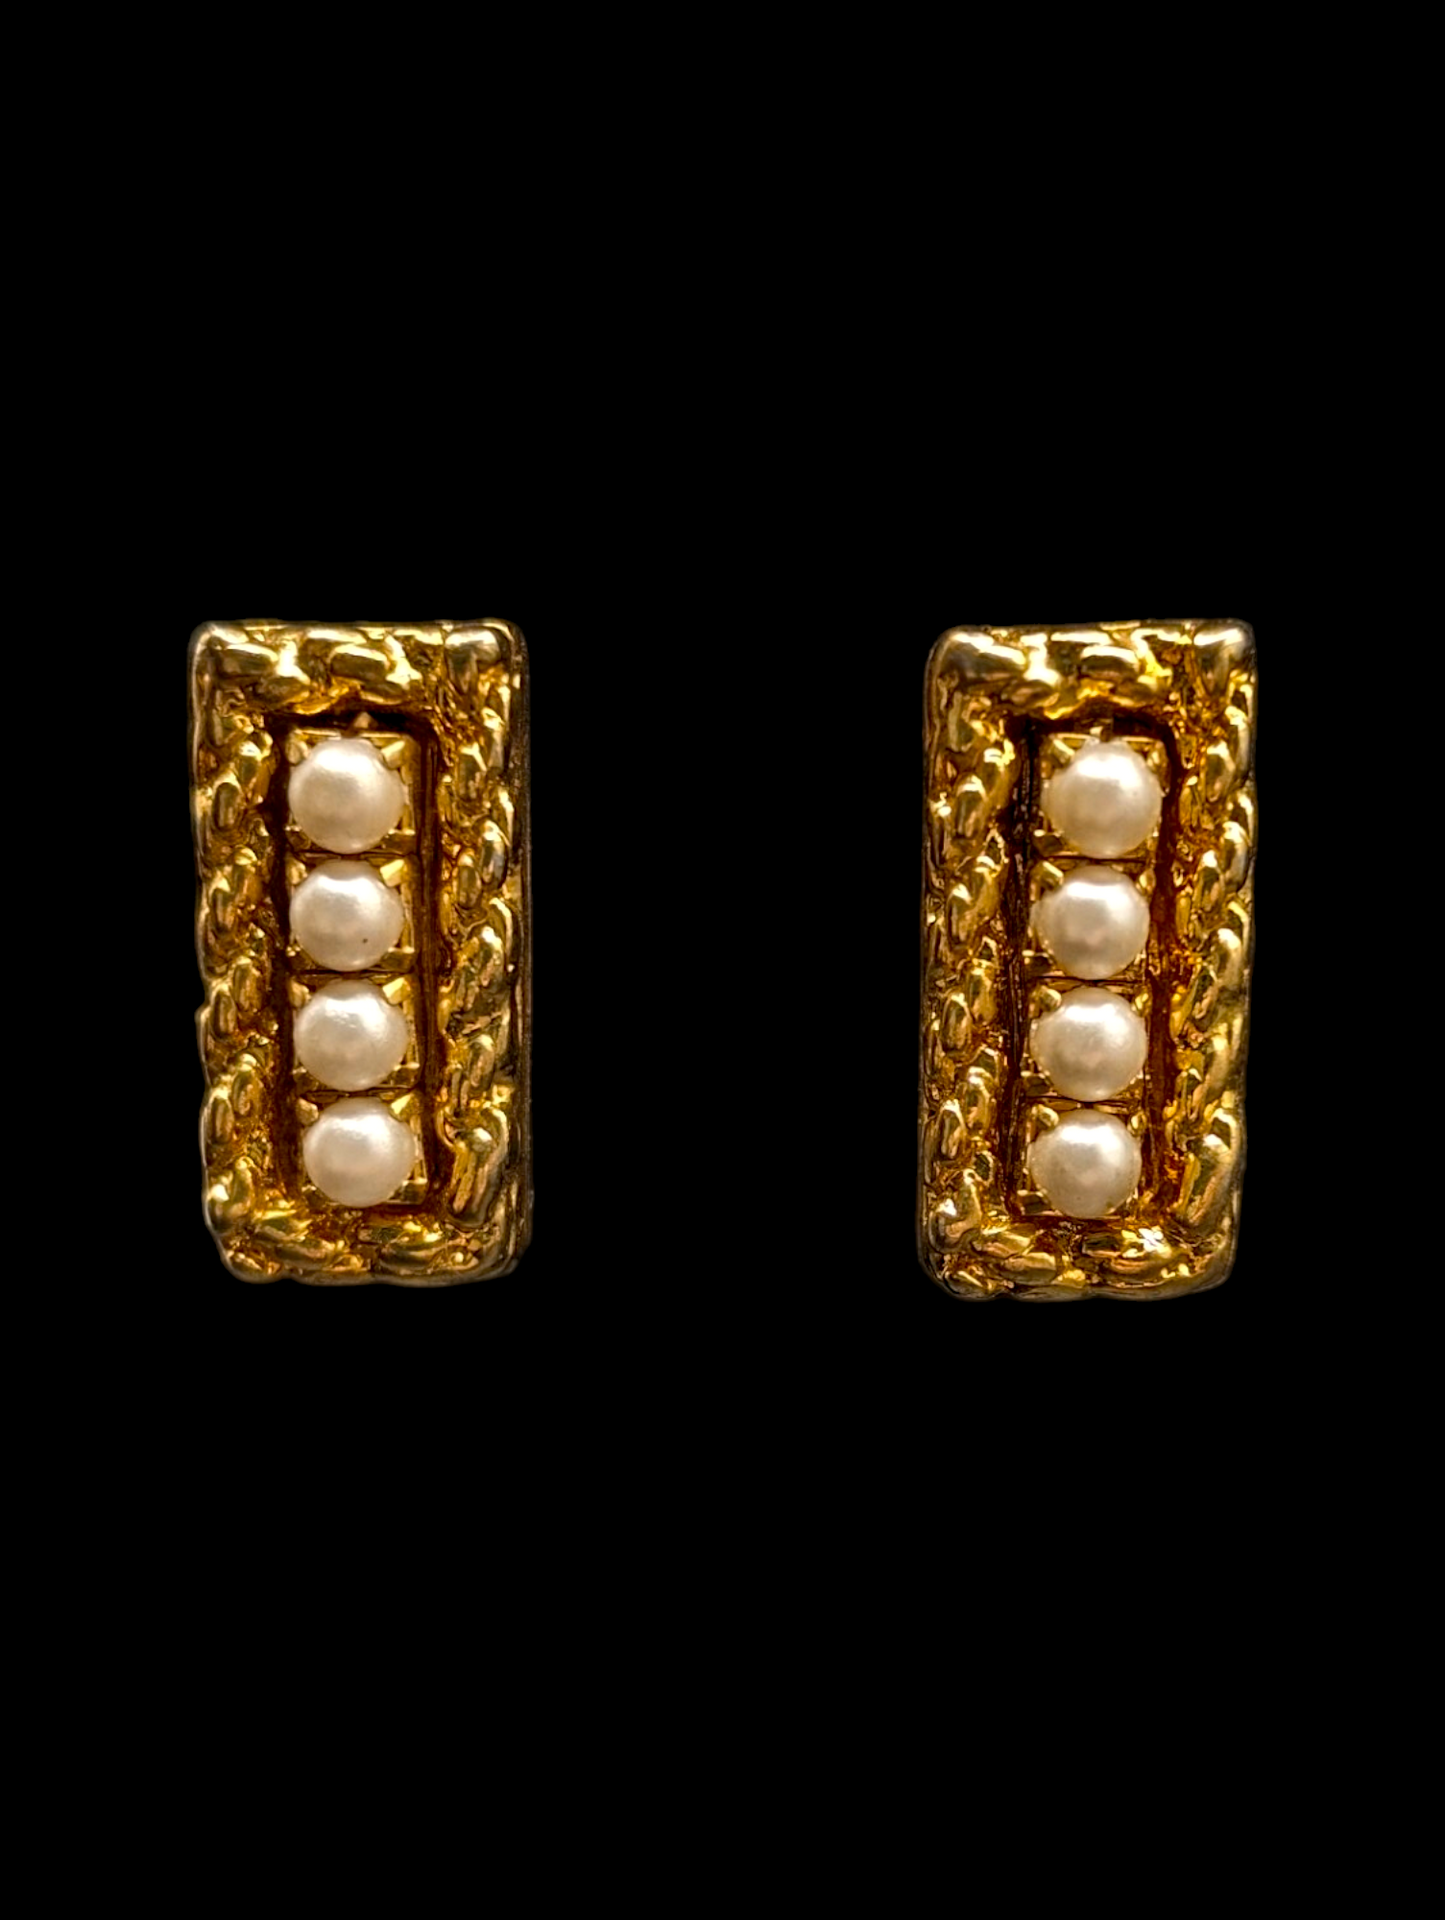 1950s-1960s Golden Nugget Rectangular Earrings with Pearl Lined Center